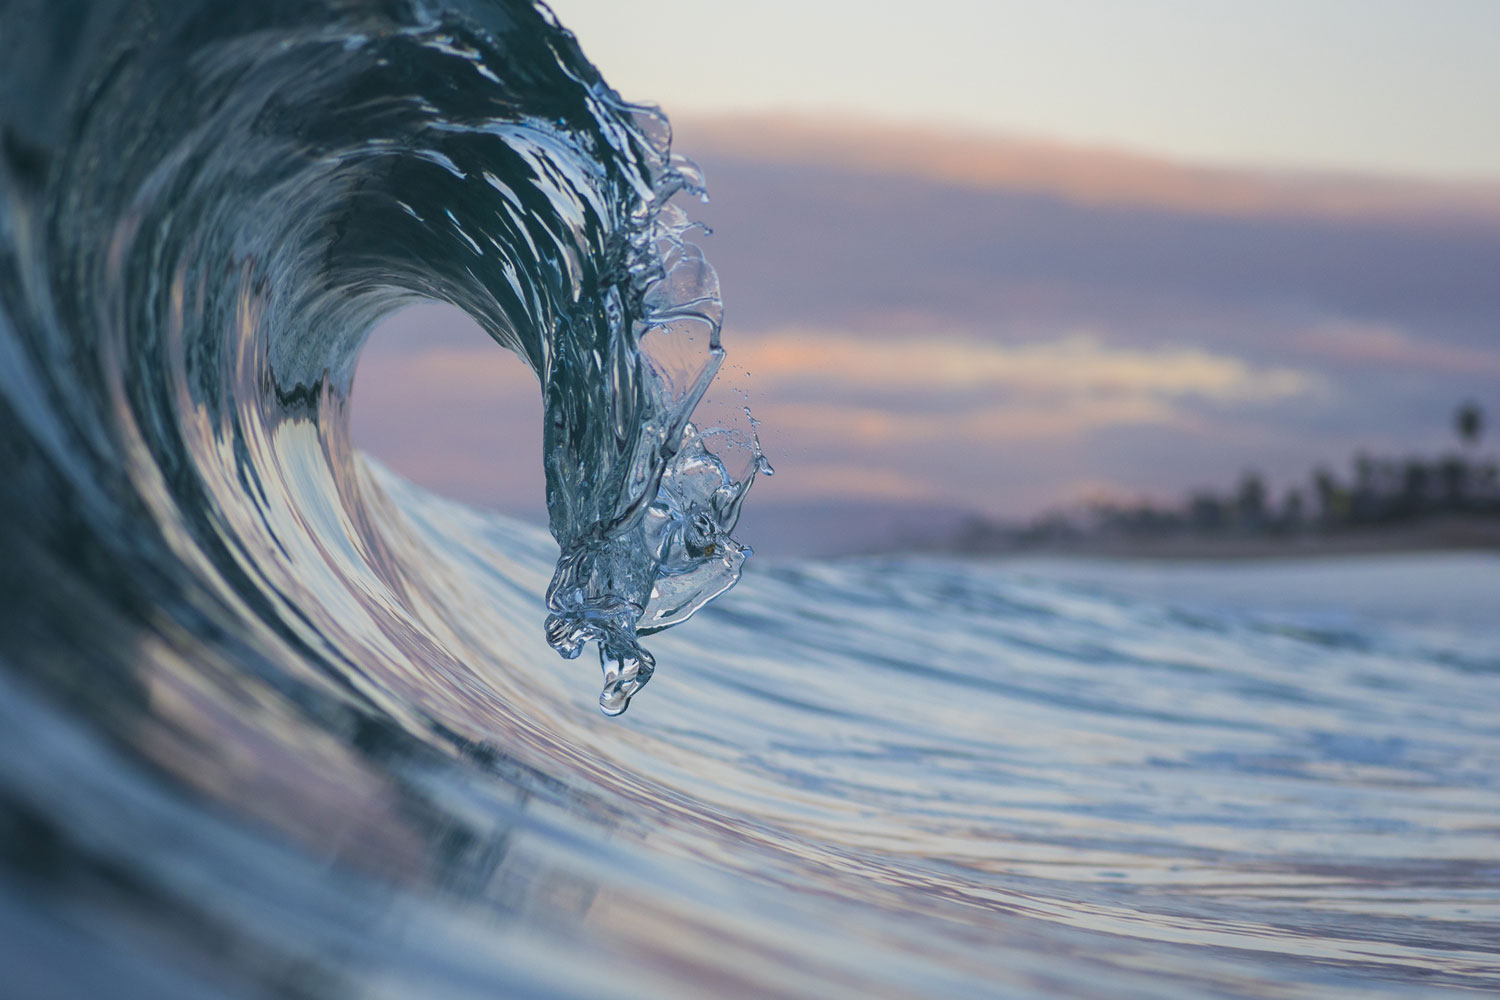 View through the curve of a small wave.